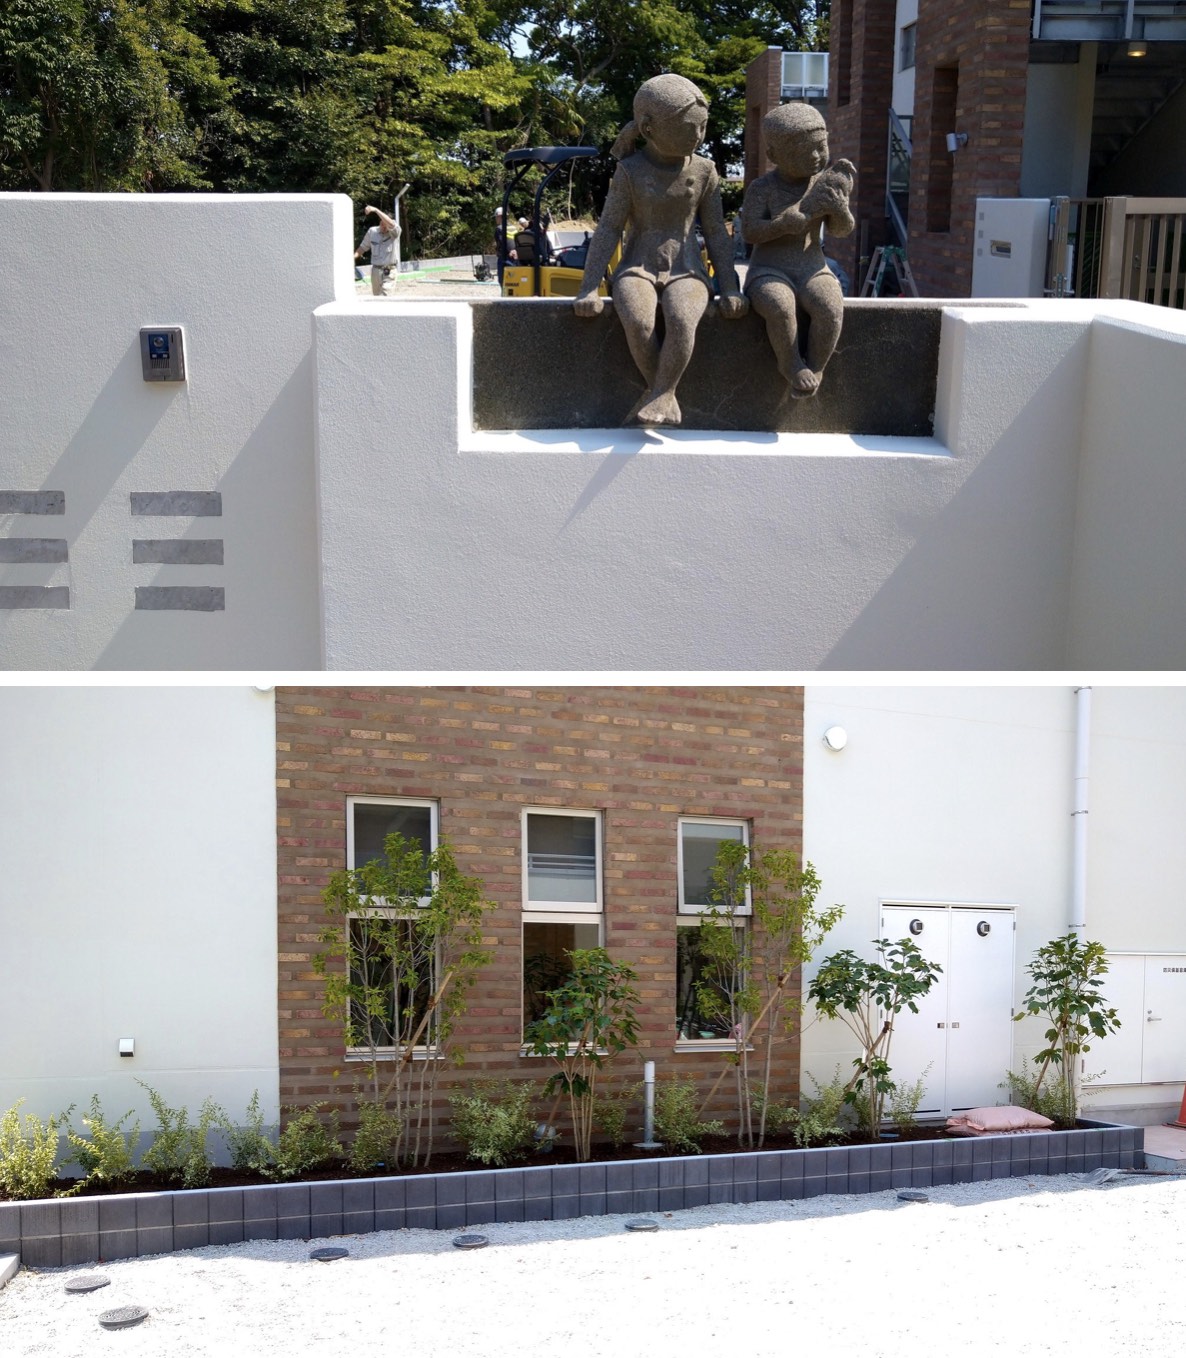 Children's School and Nursery School have incorporated terrazzo sculptures by Katsuzo Entsuba. Now it's time for cleaning and planting work.